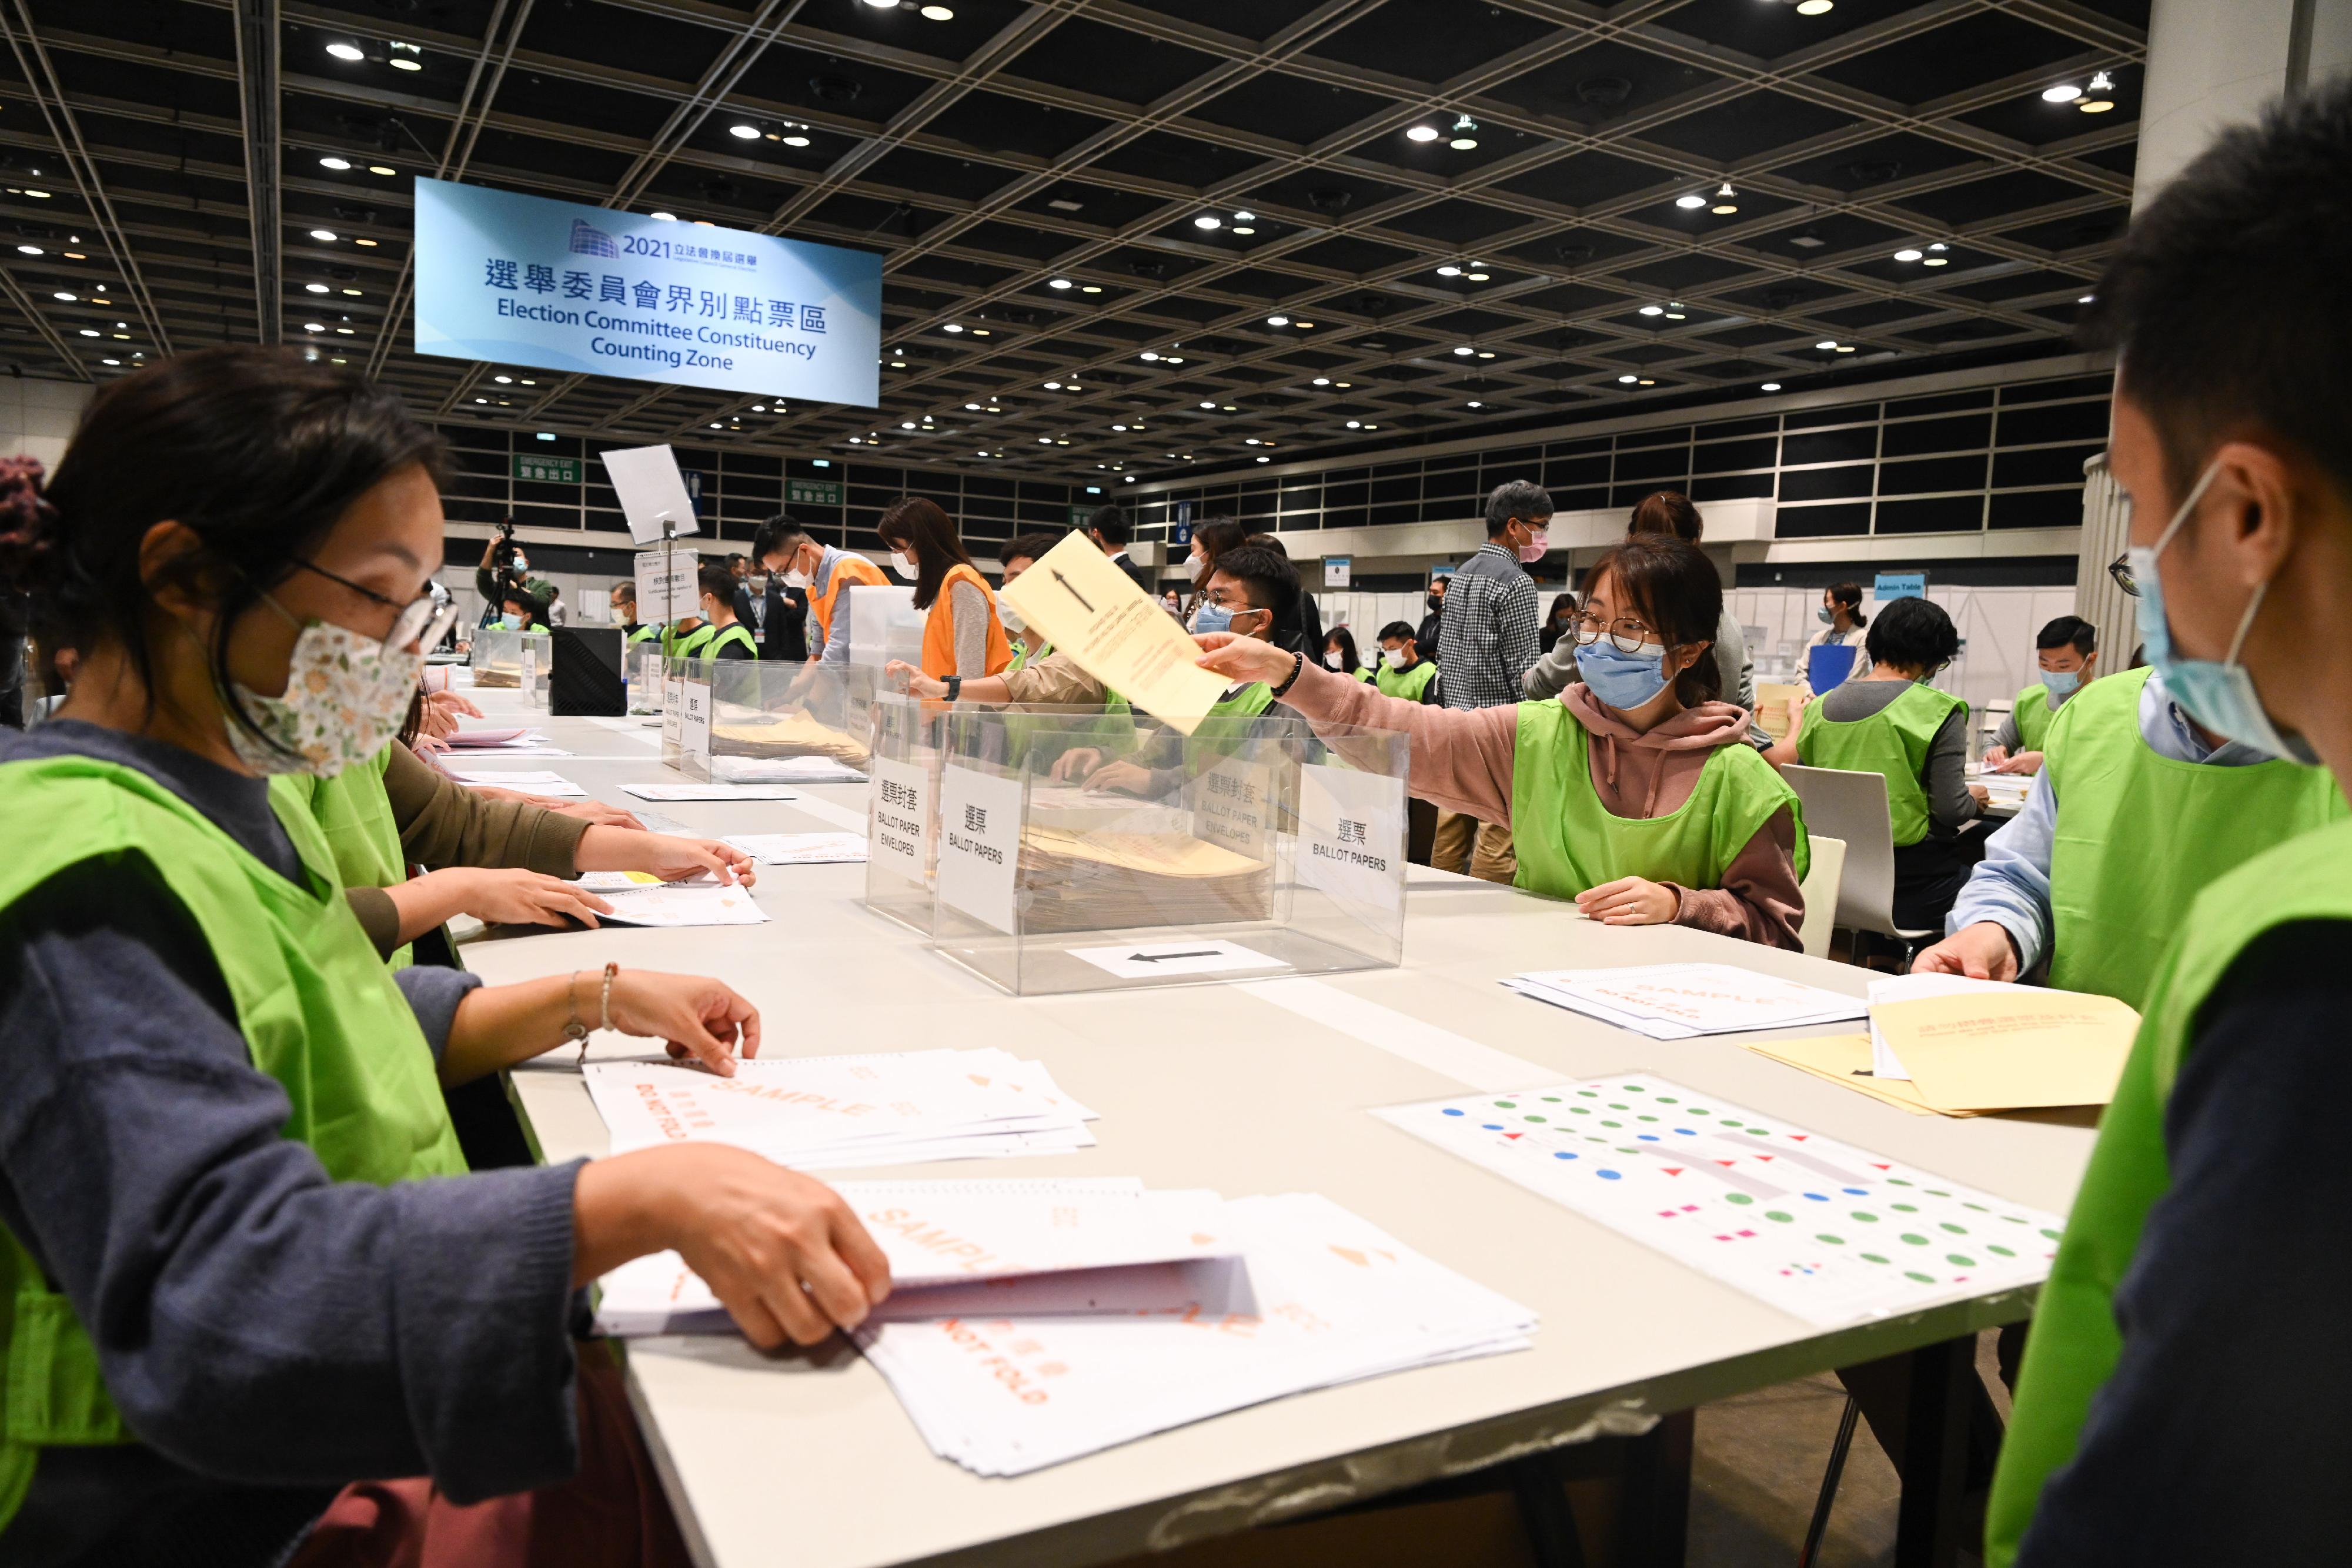 The Chairman of the Electoral Affairs Commission, Mr Justice Barnabas Fung Wah, visited the central counting station of the 2021 Legislative Council General Election at the Hong Kong Convention and Exhibition Centre and inspected the training sessions with practical sessions and simulated activities for counting staff. Photo shows staff in a simulation of taking out the ballot papers of the Election Committee constituency from the envelopes.